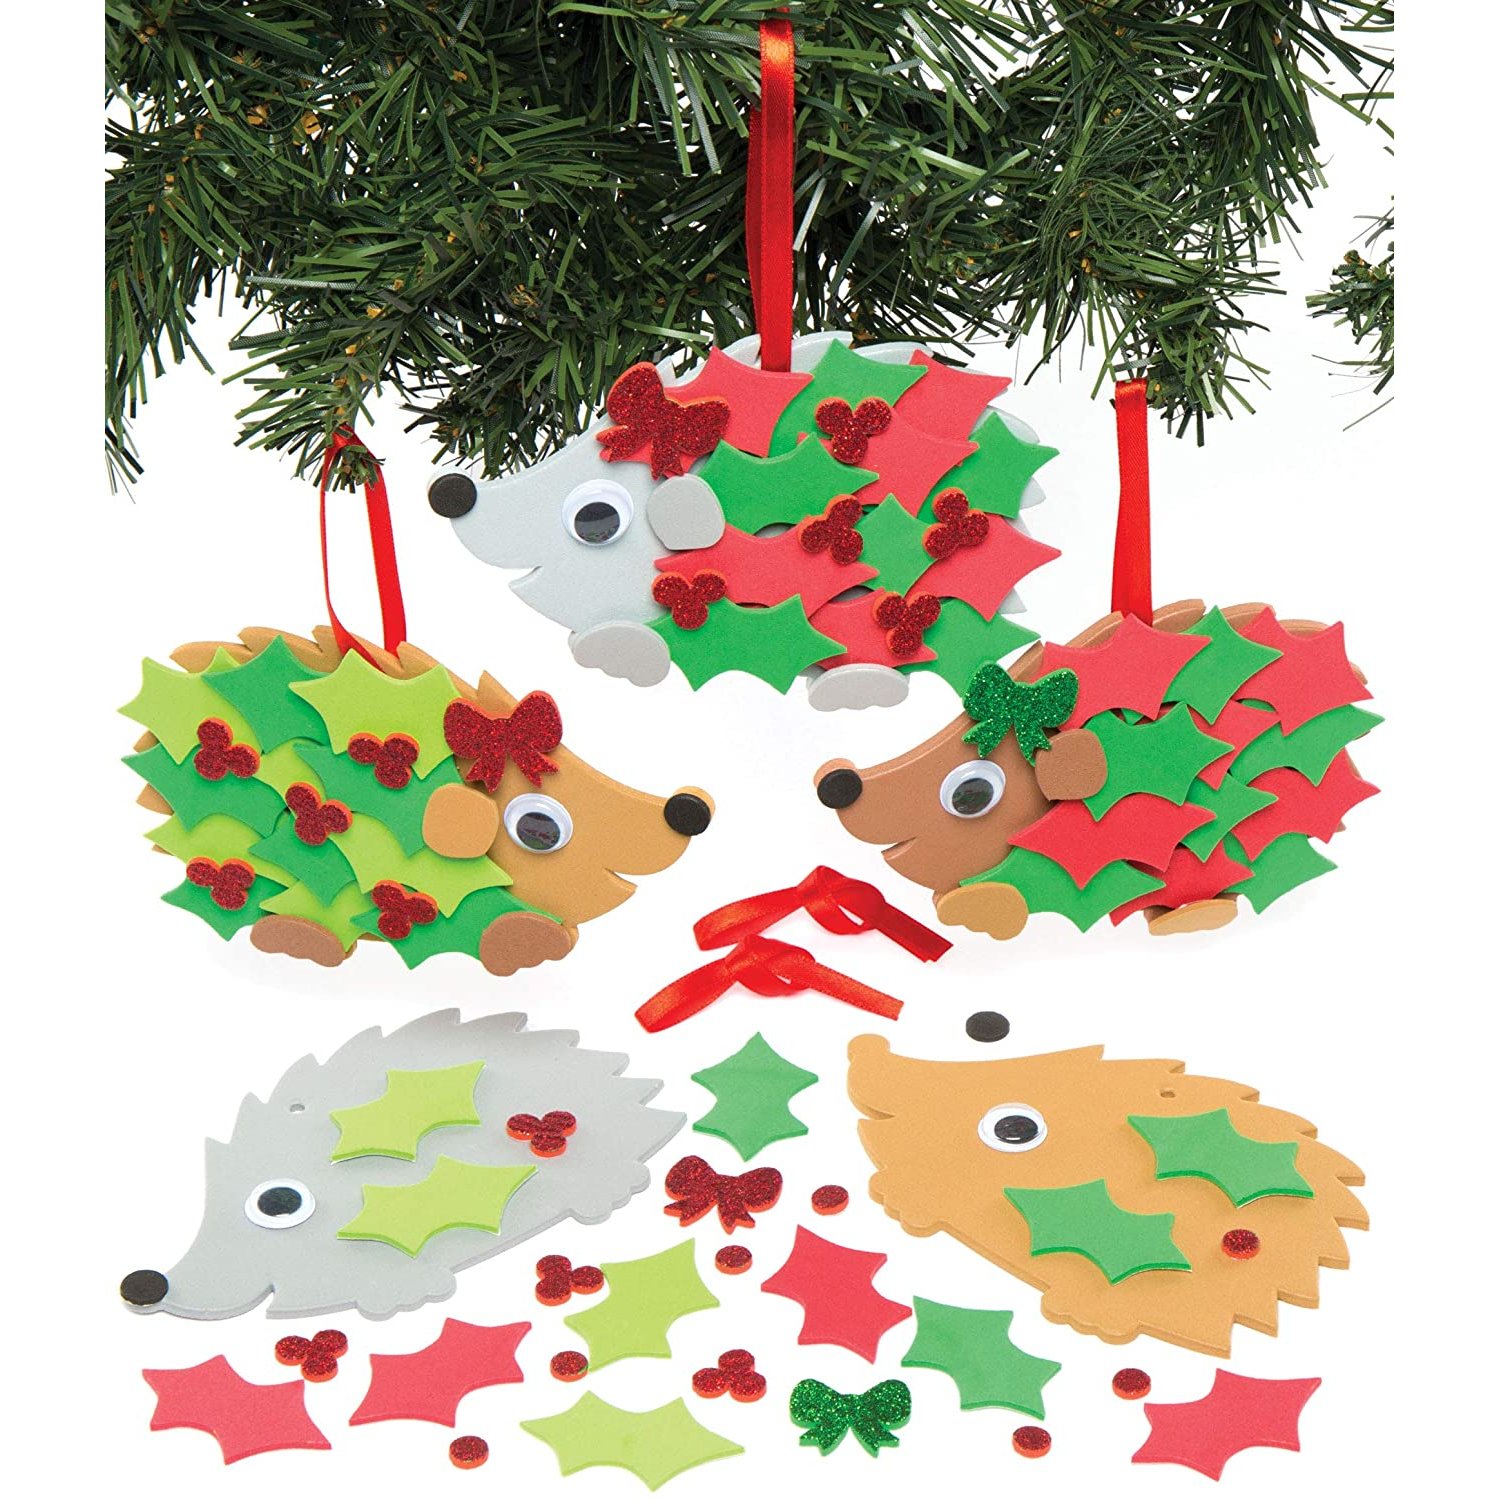 Baker Ross AC290 Holly Hedgehog Foam Kits ? Creative Christmas Art and Craft Supplies for Kids to Make and Decorate (Pack of 5), Assorted